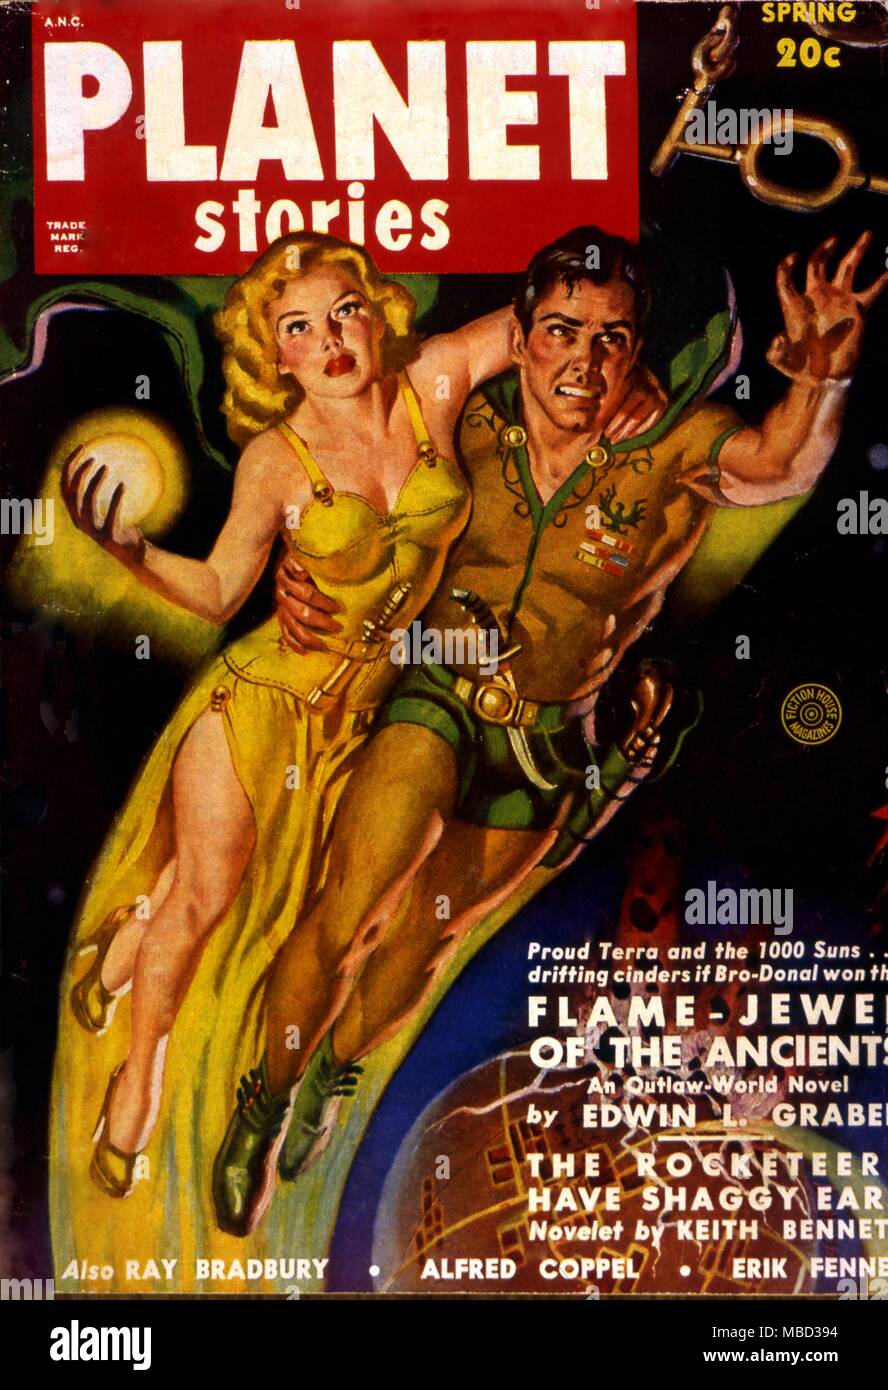 Science Fiction and Horror Magazines Cover of Planet Stories. Spring 1950. Artwork by Graber. Stock Photo